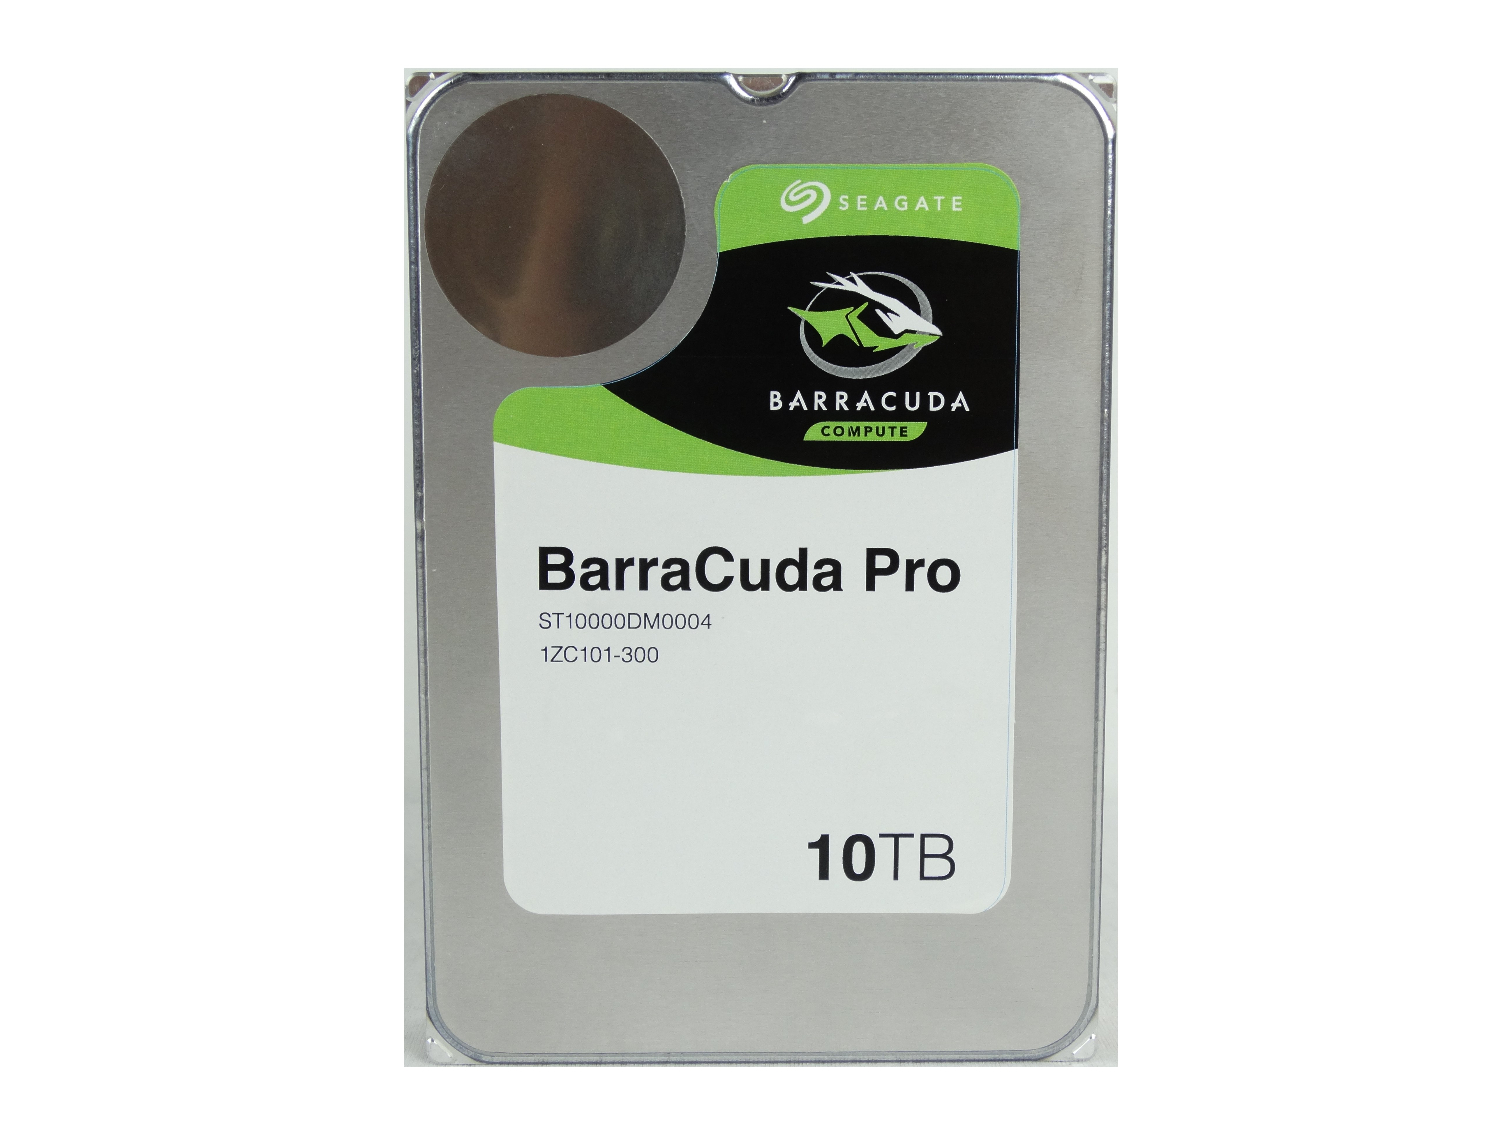 fist Correlate recovery Seagate BarraCuda Pro 10TB HDD Review - Tom's Hardware | Tom's Hardware